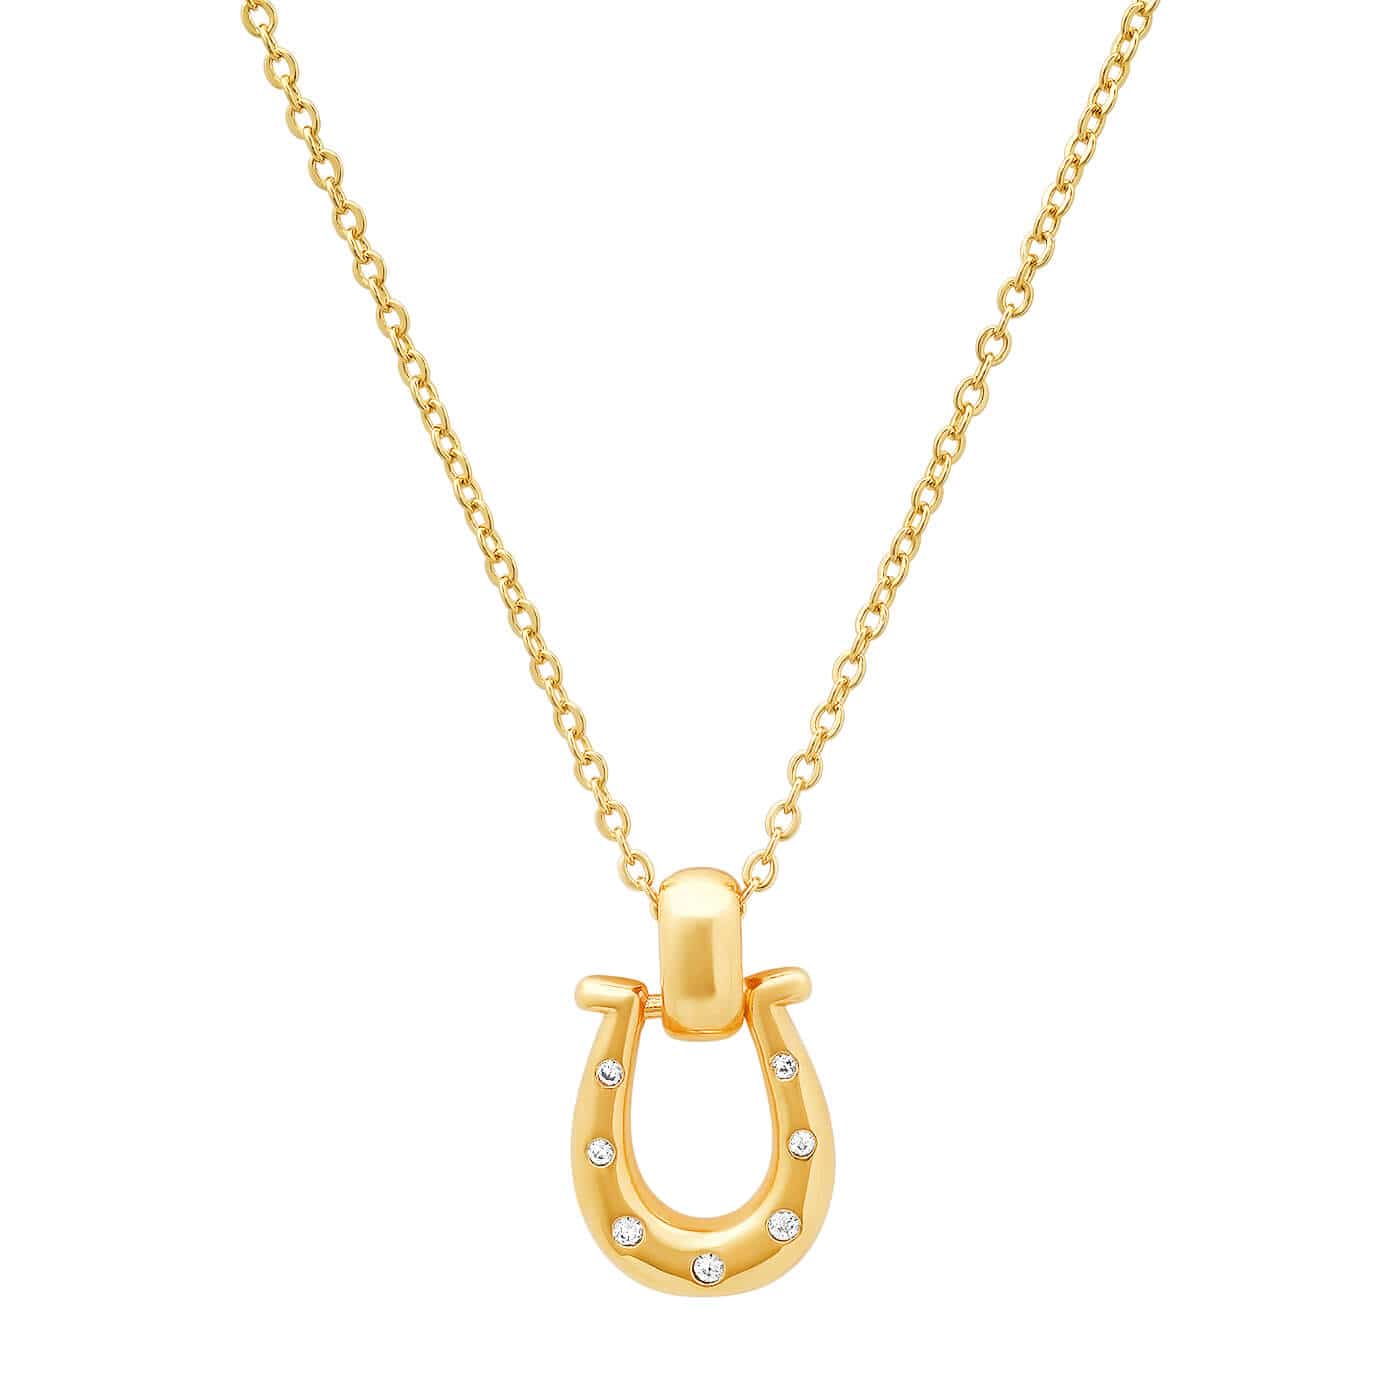 TAI JEWELRY Necklace Gold Horseshoe Necklace with Embedded CZ Stones